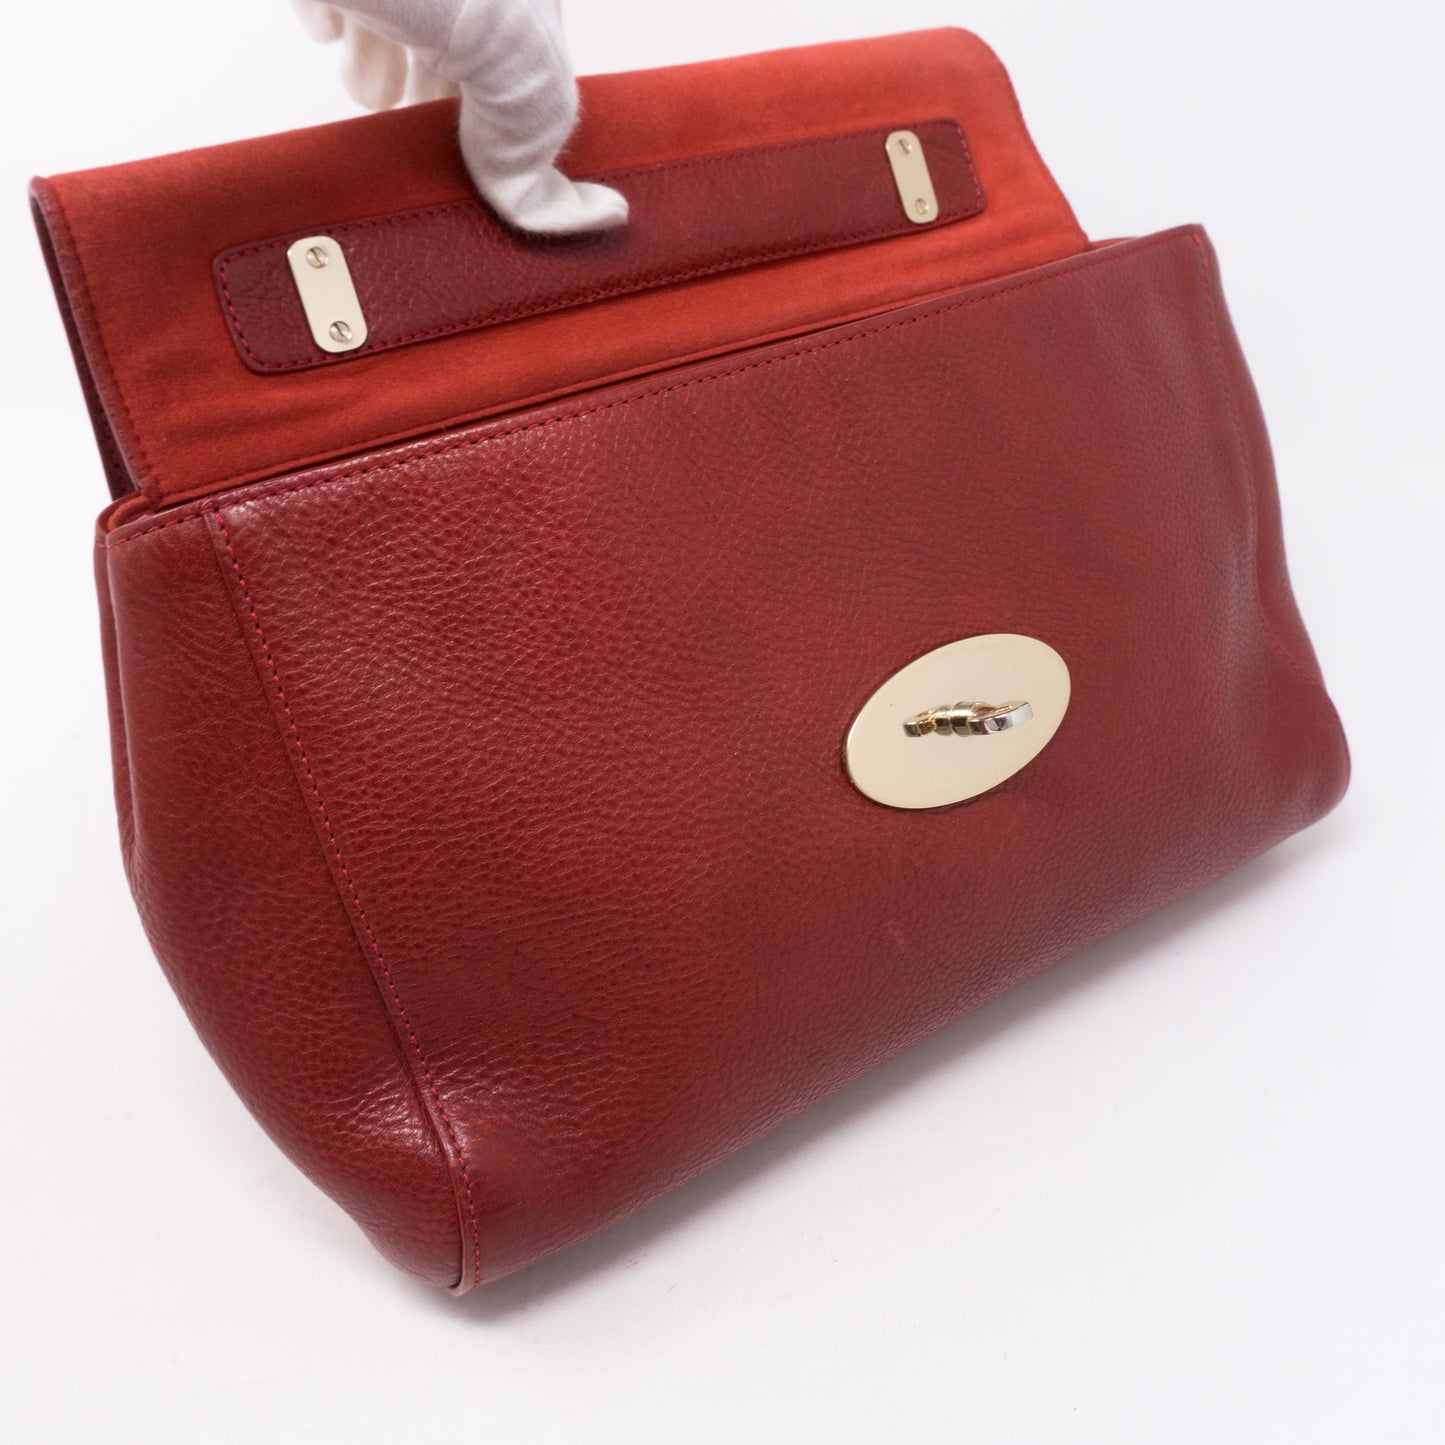 Lily Medium Red Leather